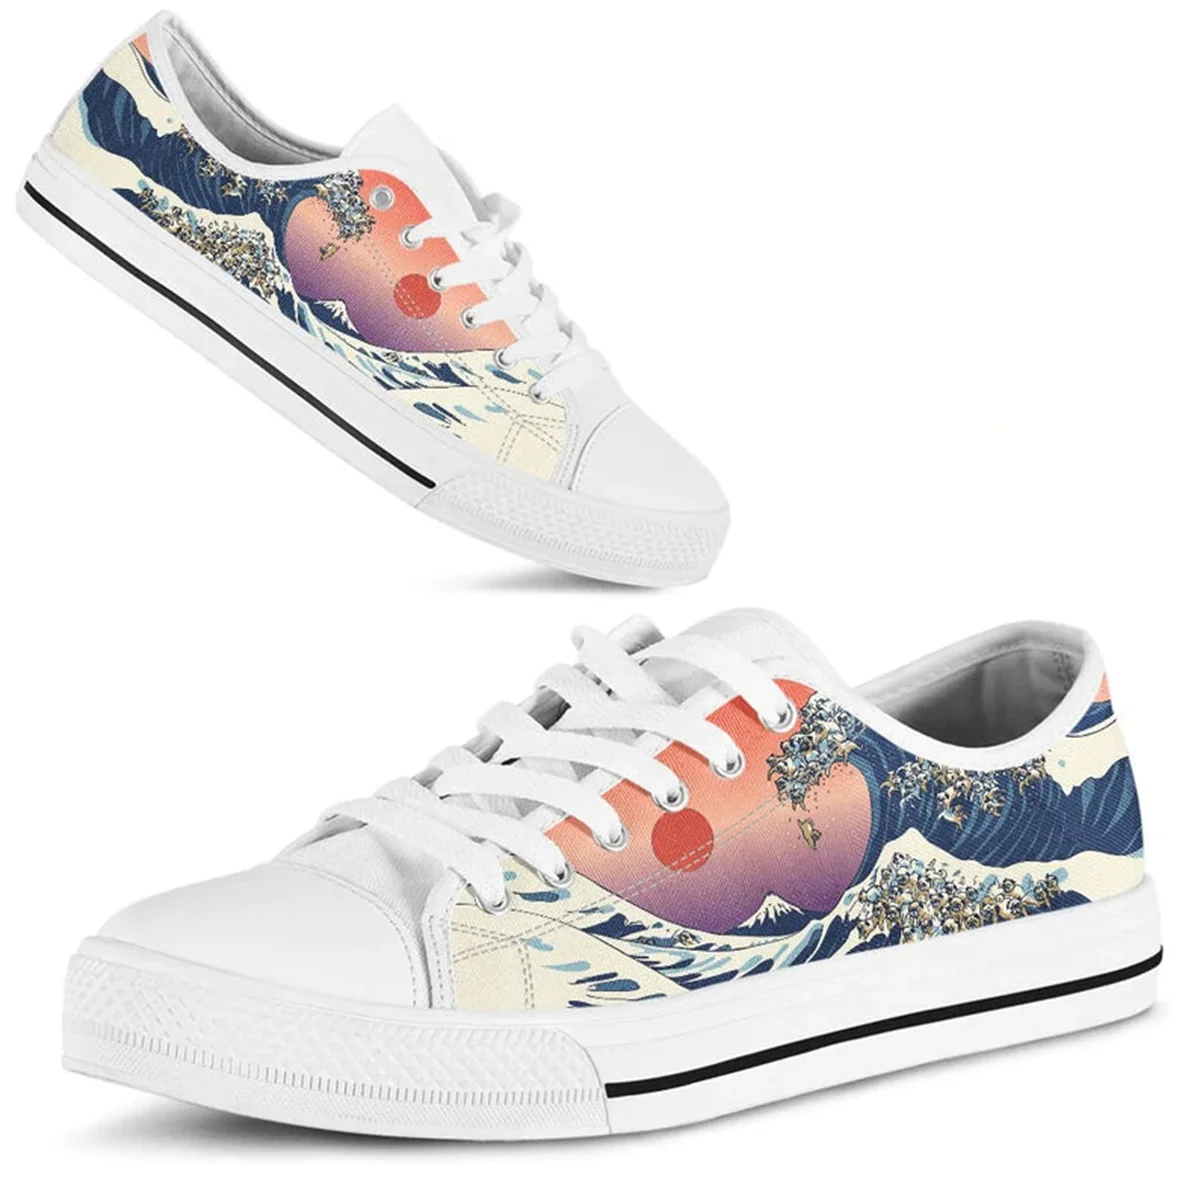 

BKQU The Great Wave Bulldog Classic Women's Sneakers Sports Canvas Shoes For Women Casual Ladies Flats Lace-up Footwear White